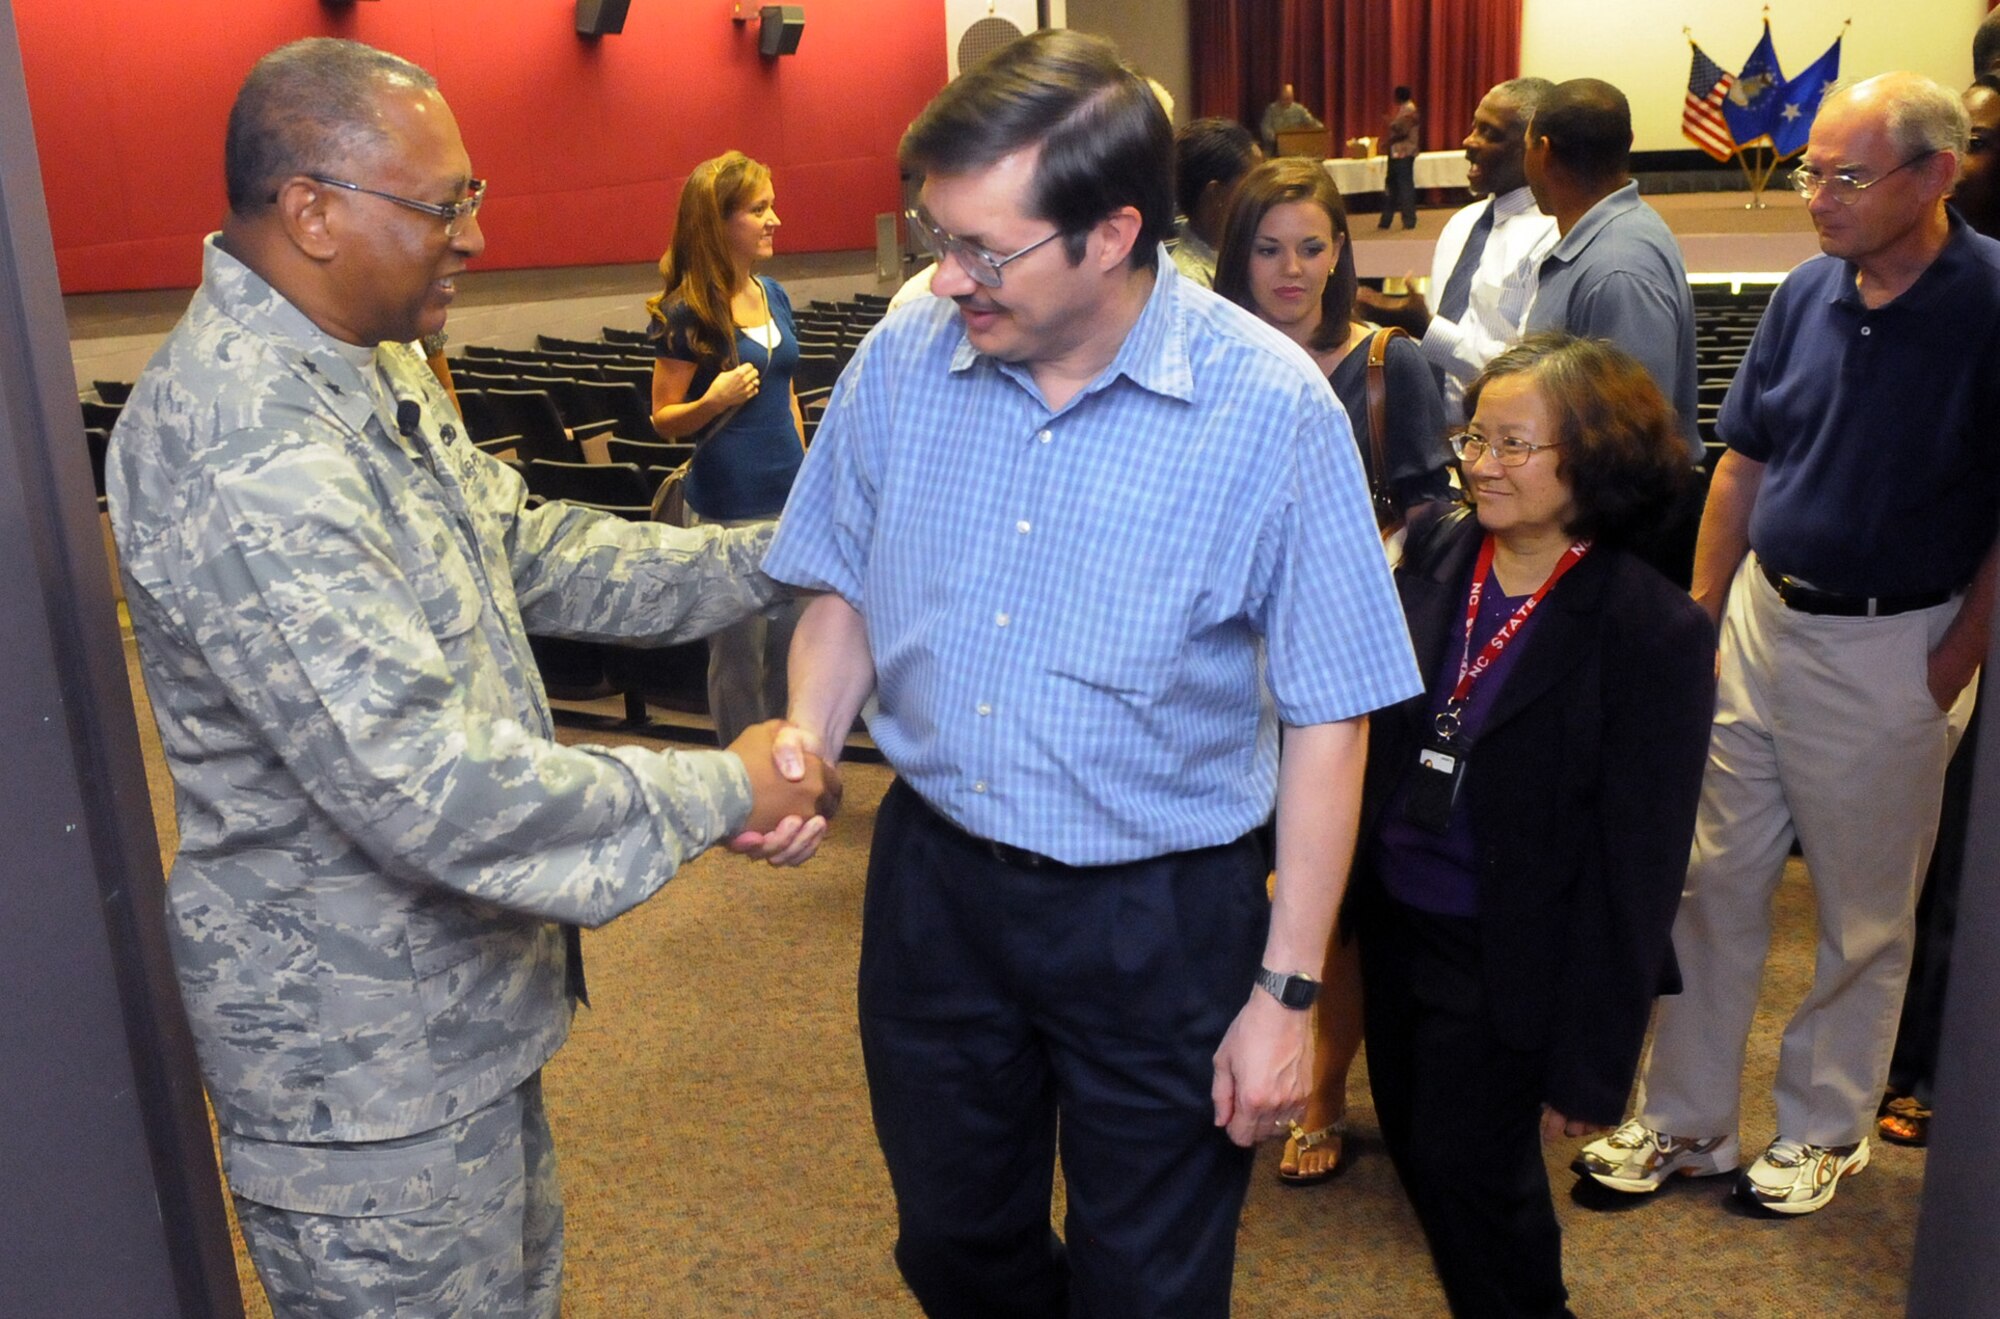 Maj. Gen. Gary T. McCoy shakes hands and speaks with workforce members after a town hall meeting during his visit to Robins. U. S. Air Force photo by Sue Sapp